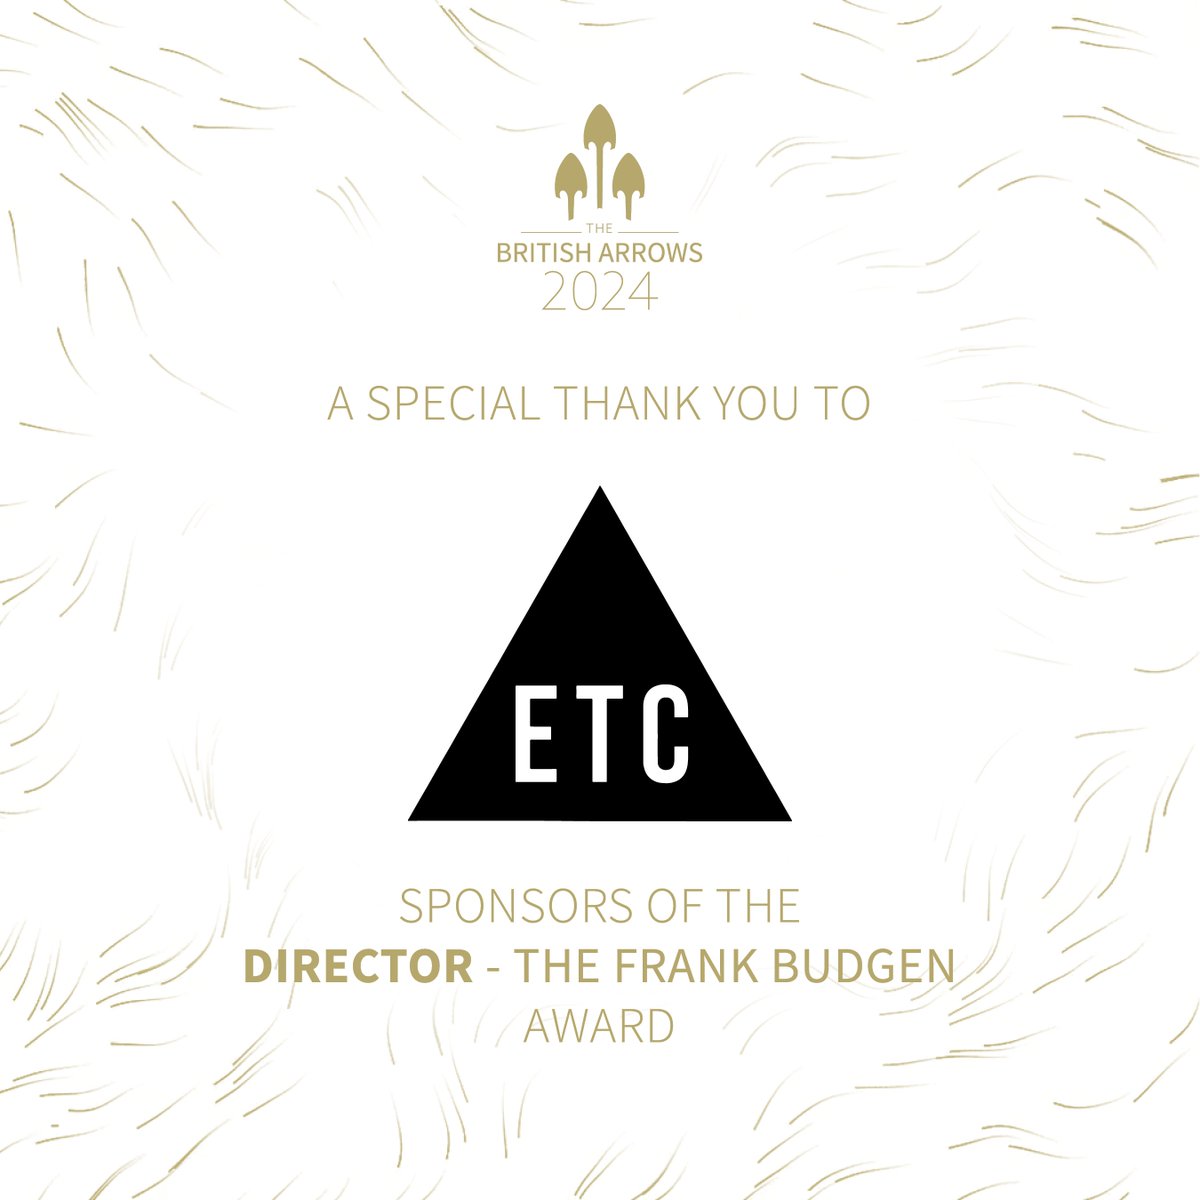 A special thank you to ETC Sponsors of the Best Director - The Frank Budgen Award #BA23 #BA23 #BritishArrows #advertising #award #celebration